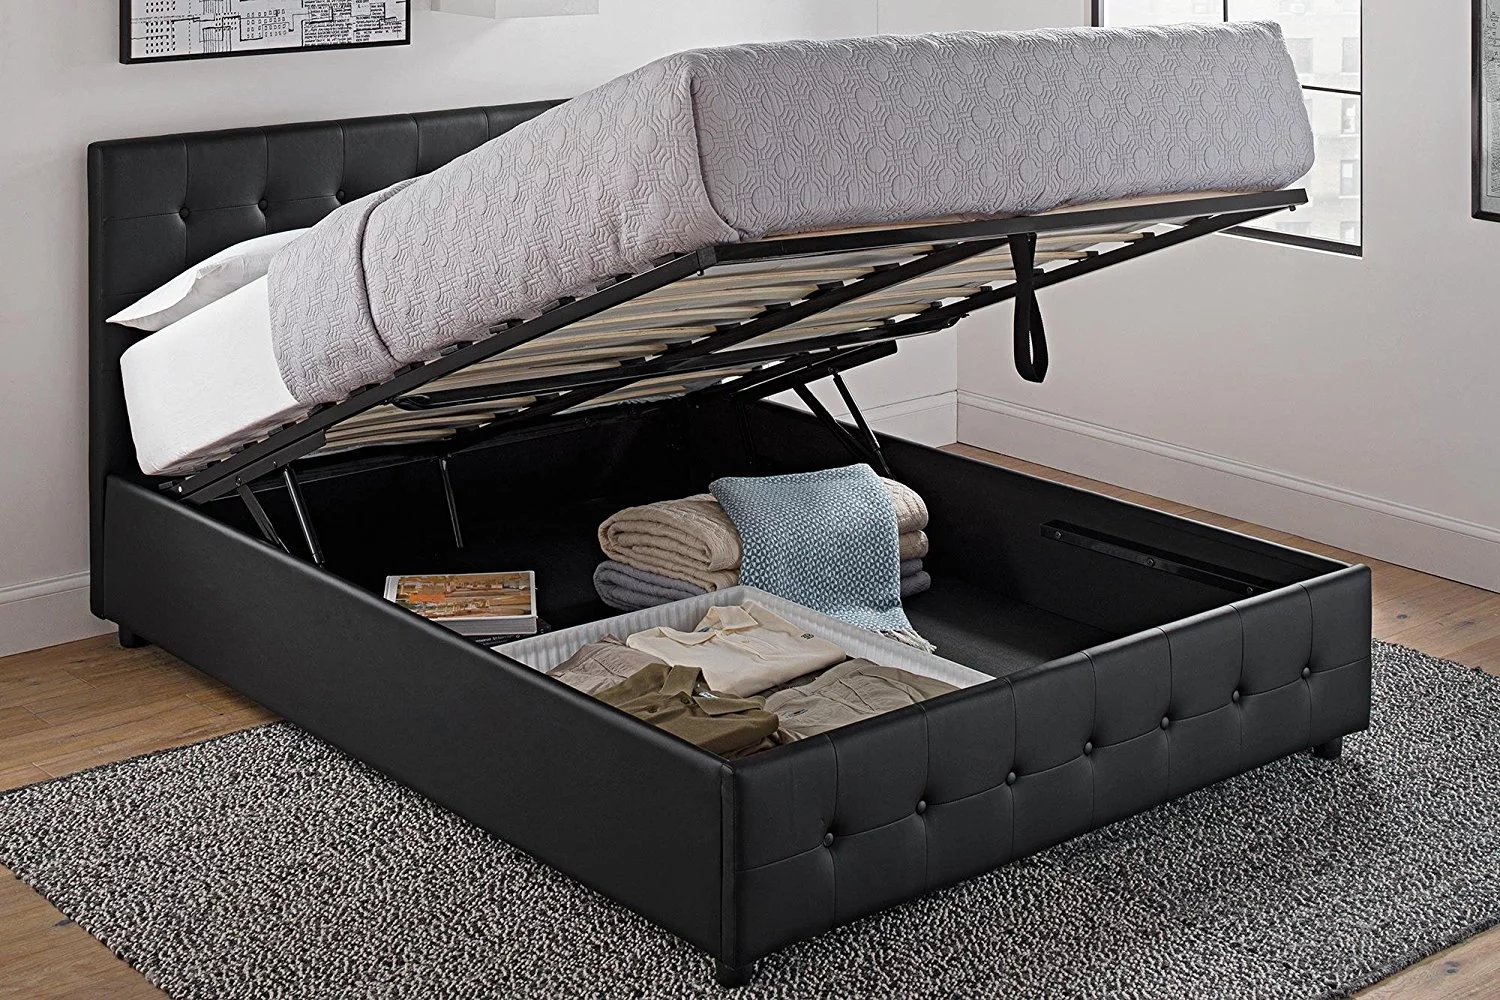 Ottoman Bed with Hidden Compartment